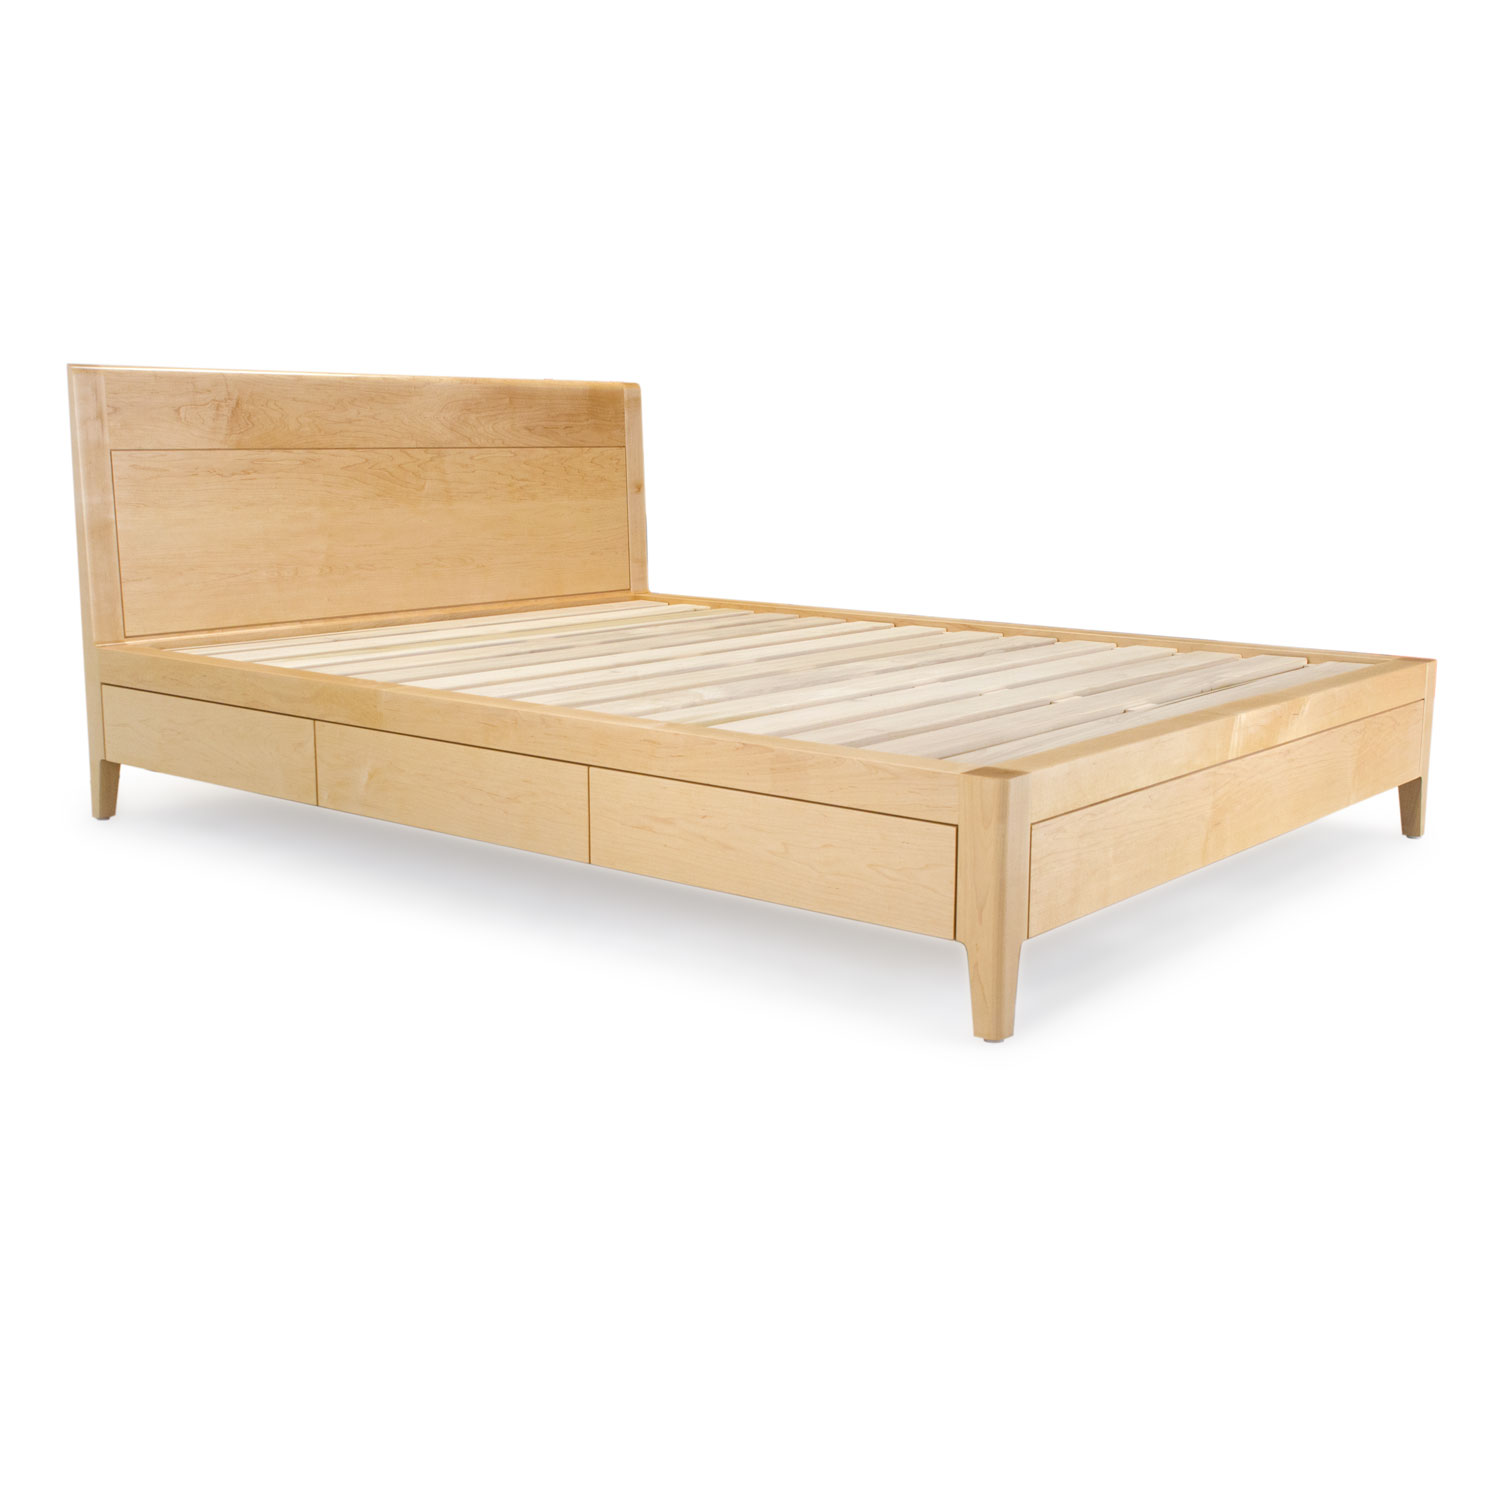 Natural Queen Storage Platform Bed Maple Finish 2 Drawers Light Wood Tones 